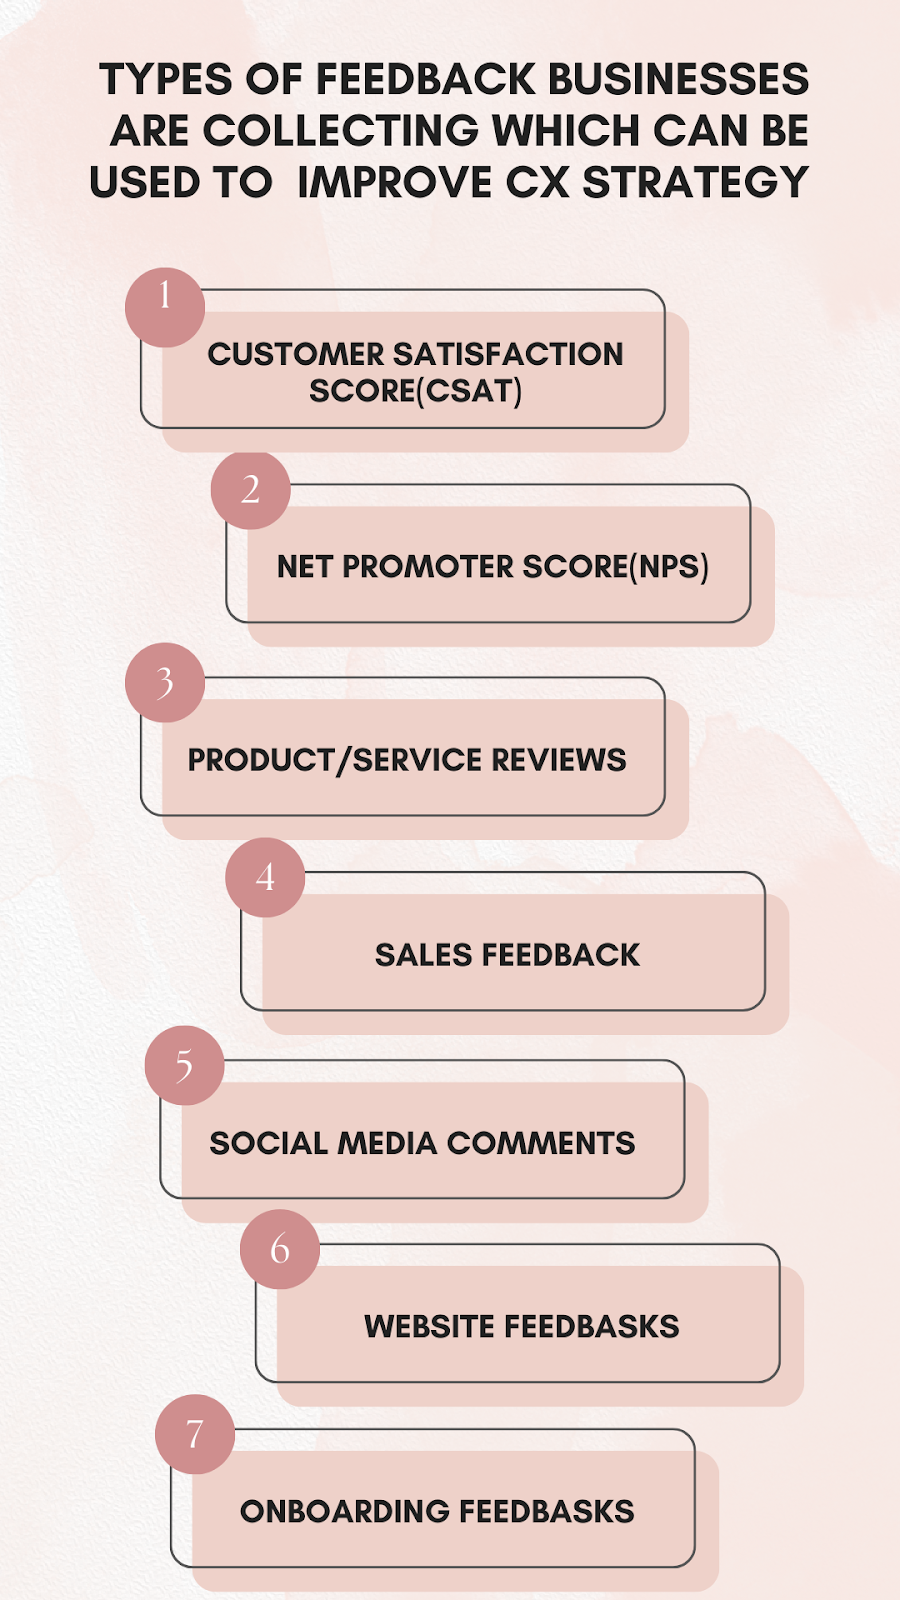 Image description: Types of feedback businesses are collecting which can be used to improve CX